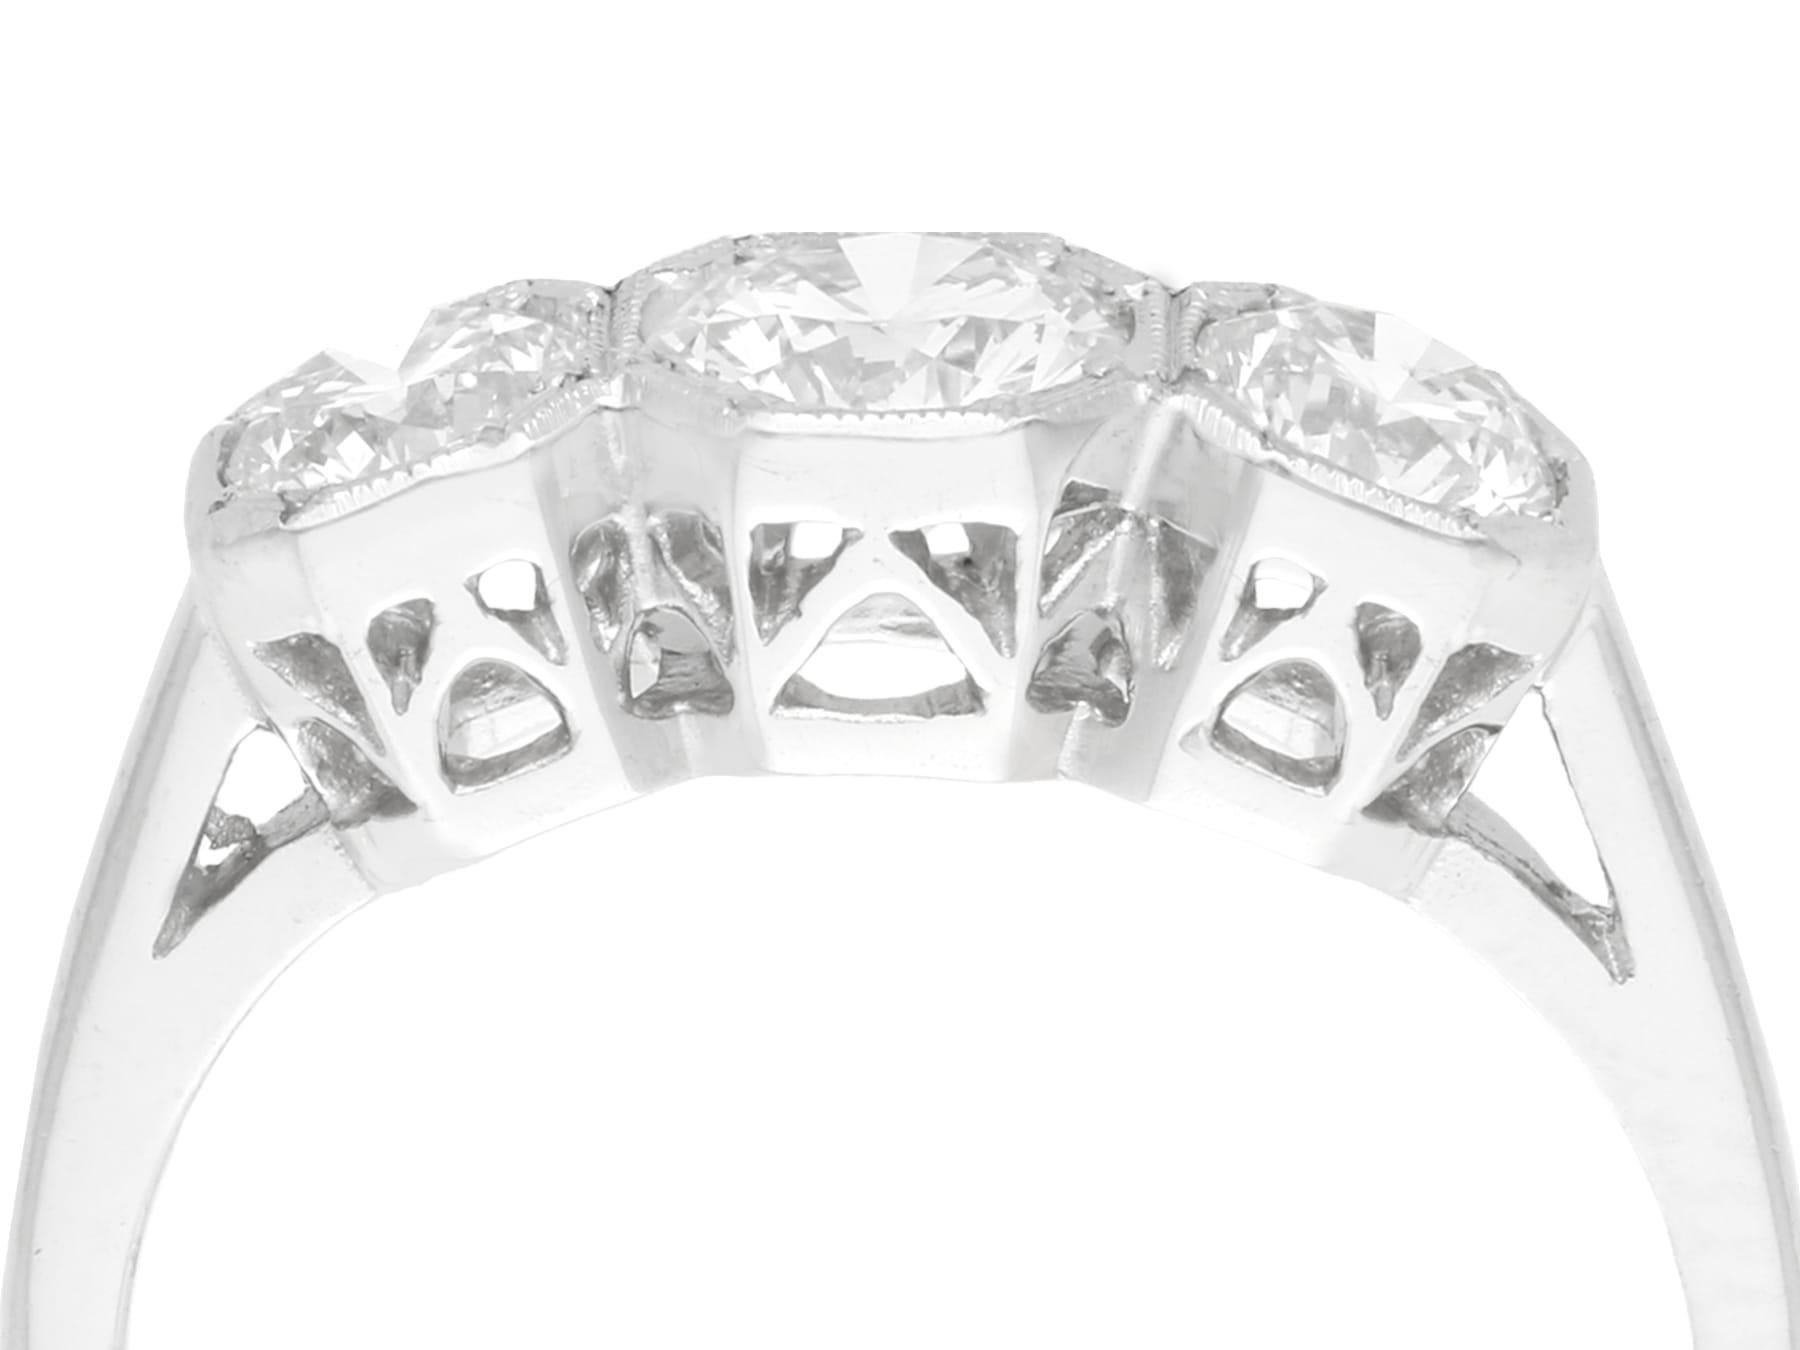 An impressive vintage 1940s 1.49 carat diamond and platinum three stone ring; part of our diverse vintage jewelry and estate jewelry collections.

This fine and impressive trilogy engagement ring has been crafted in platinum.

The pierced decorated,